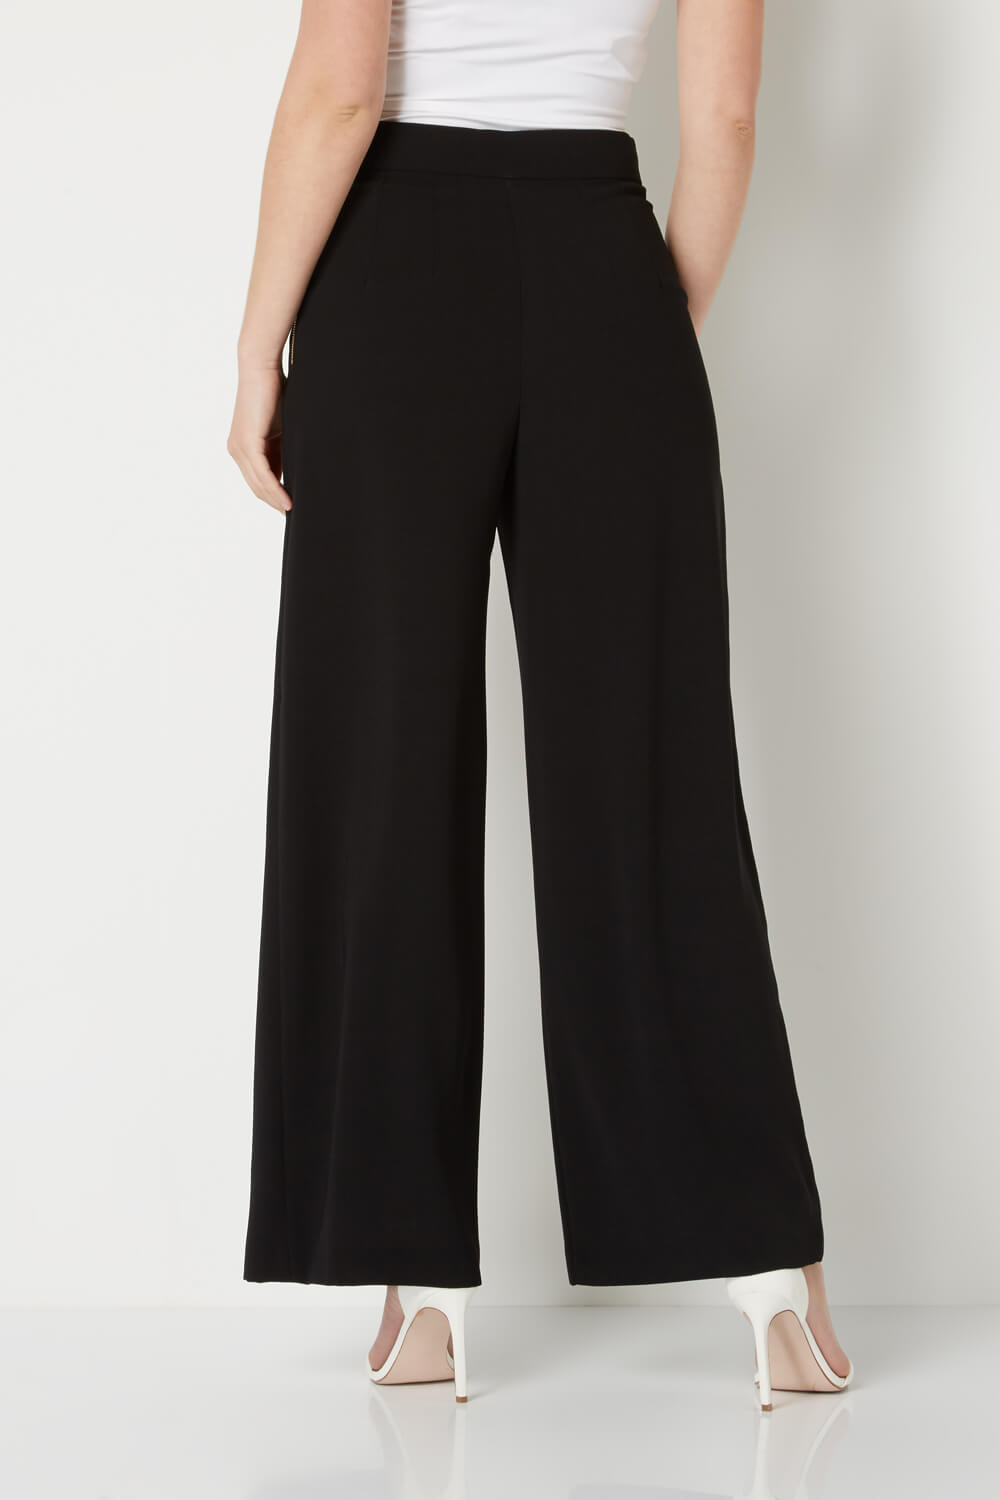 Black Wide Leg Trousers, Image 3 of 6